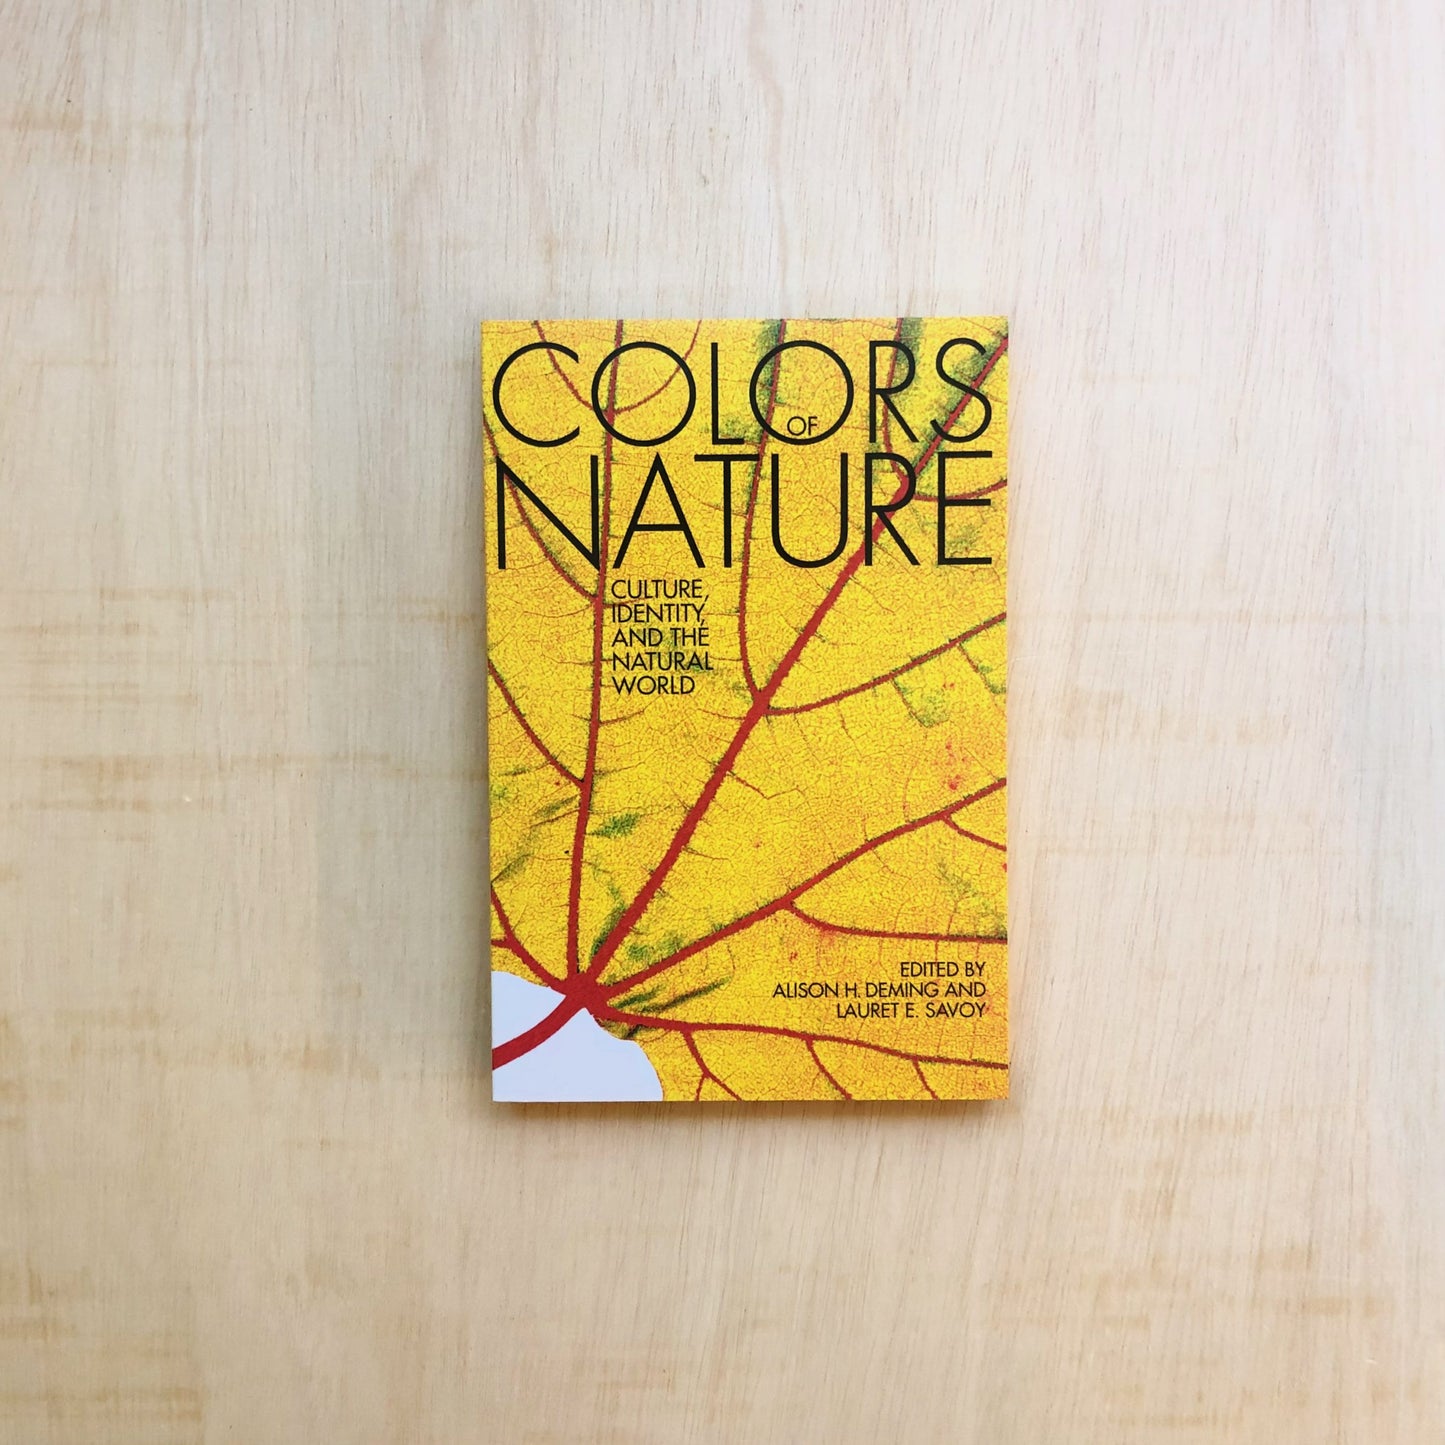 Colors of Nature - Culture, Identity and the Natural World